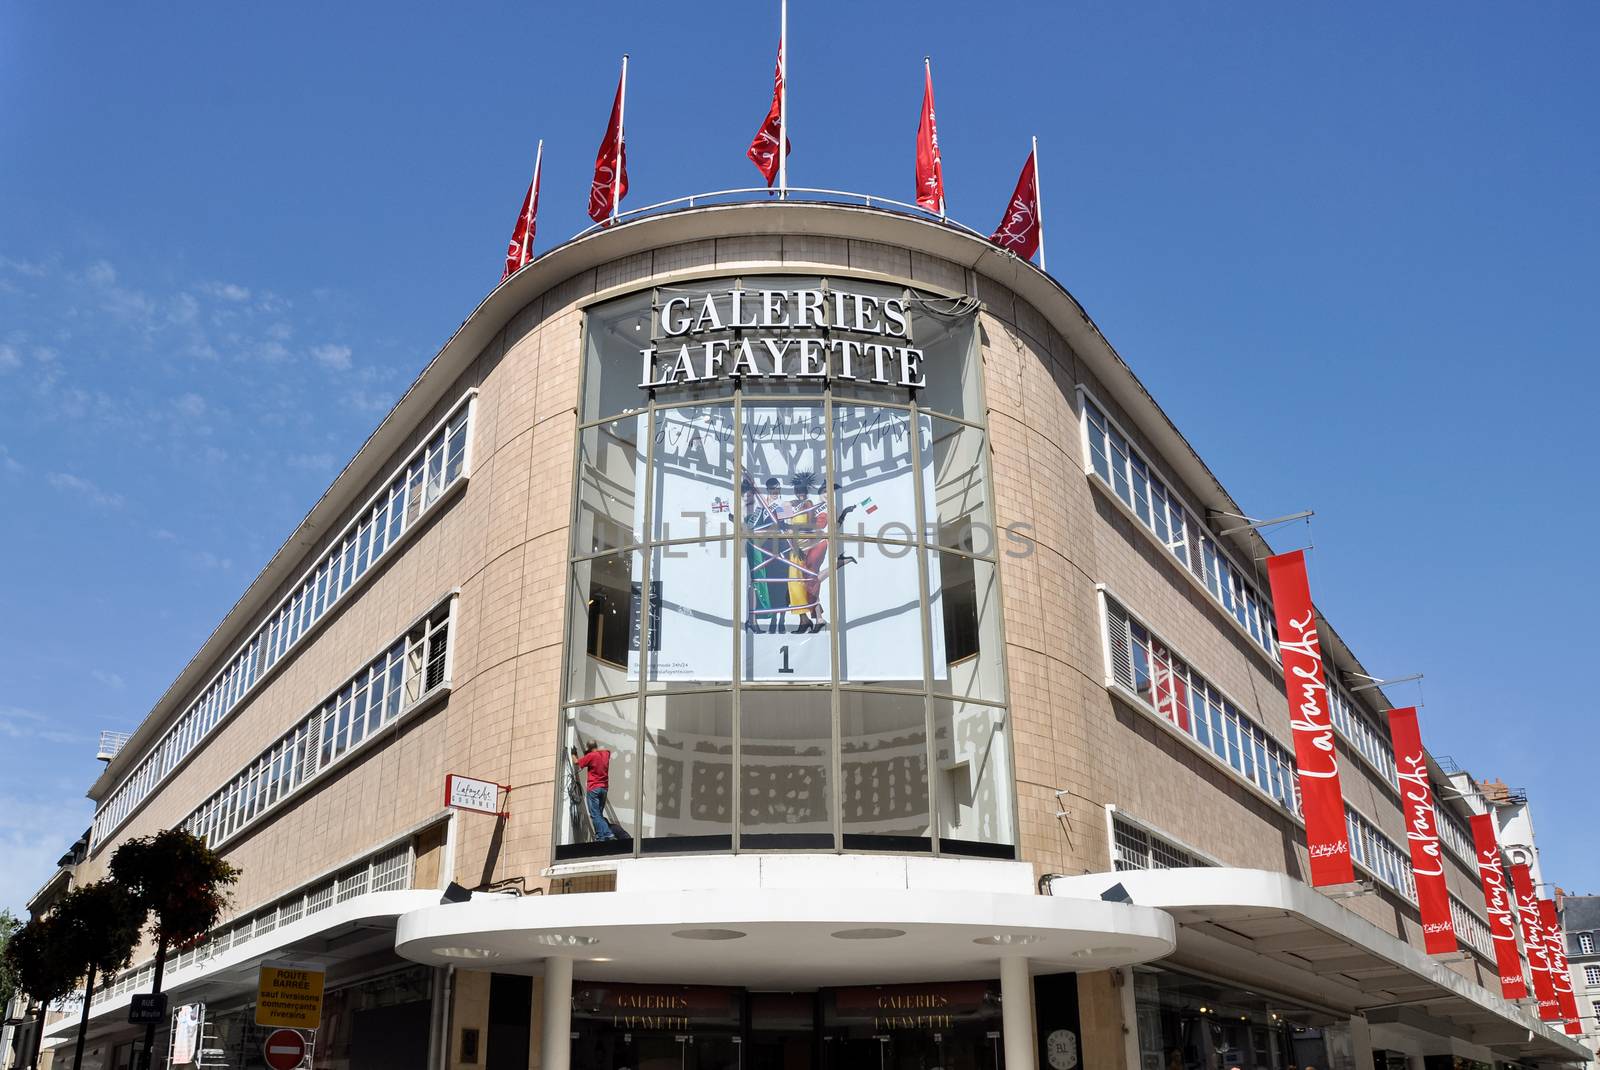 The Galeries Lafayette department store in Nantes, France by dutourdumonde